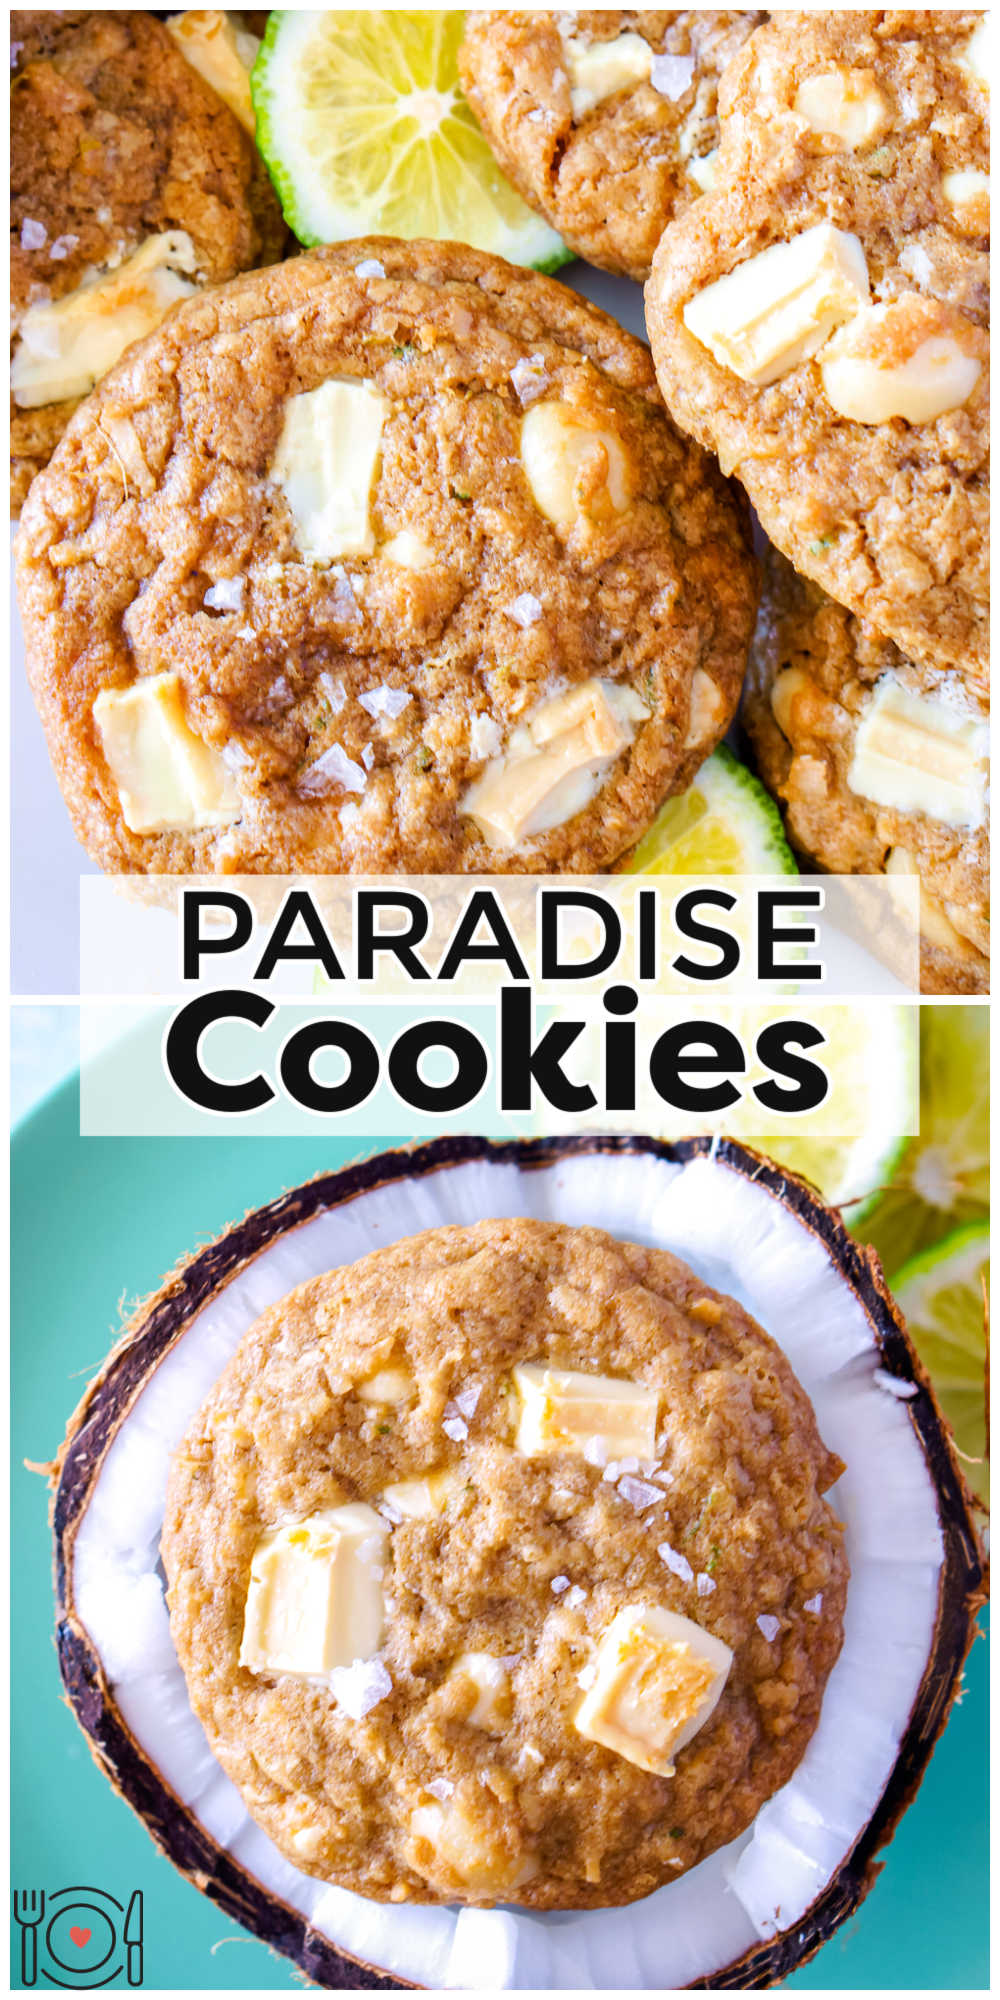 Paradise Cookies are loaded with white chocolate, macadamia nuts, coconut, lime zest, and a sprinkling of sea salt. If there was ever a cookie to eat in paradise, these would be it! via @foodfolksandfun